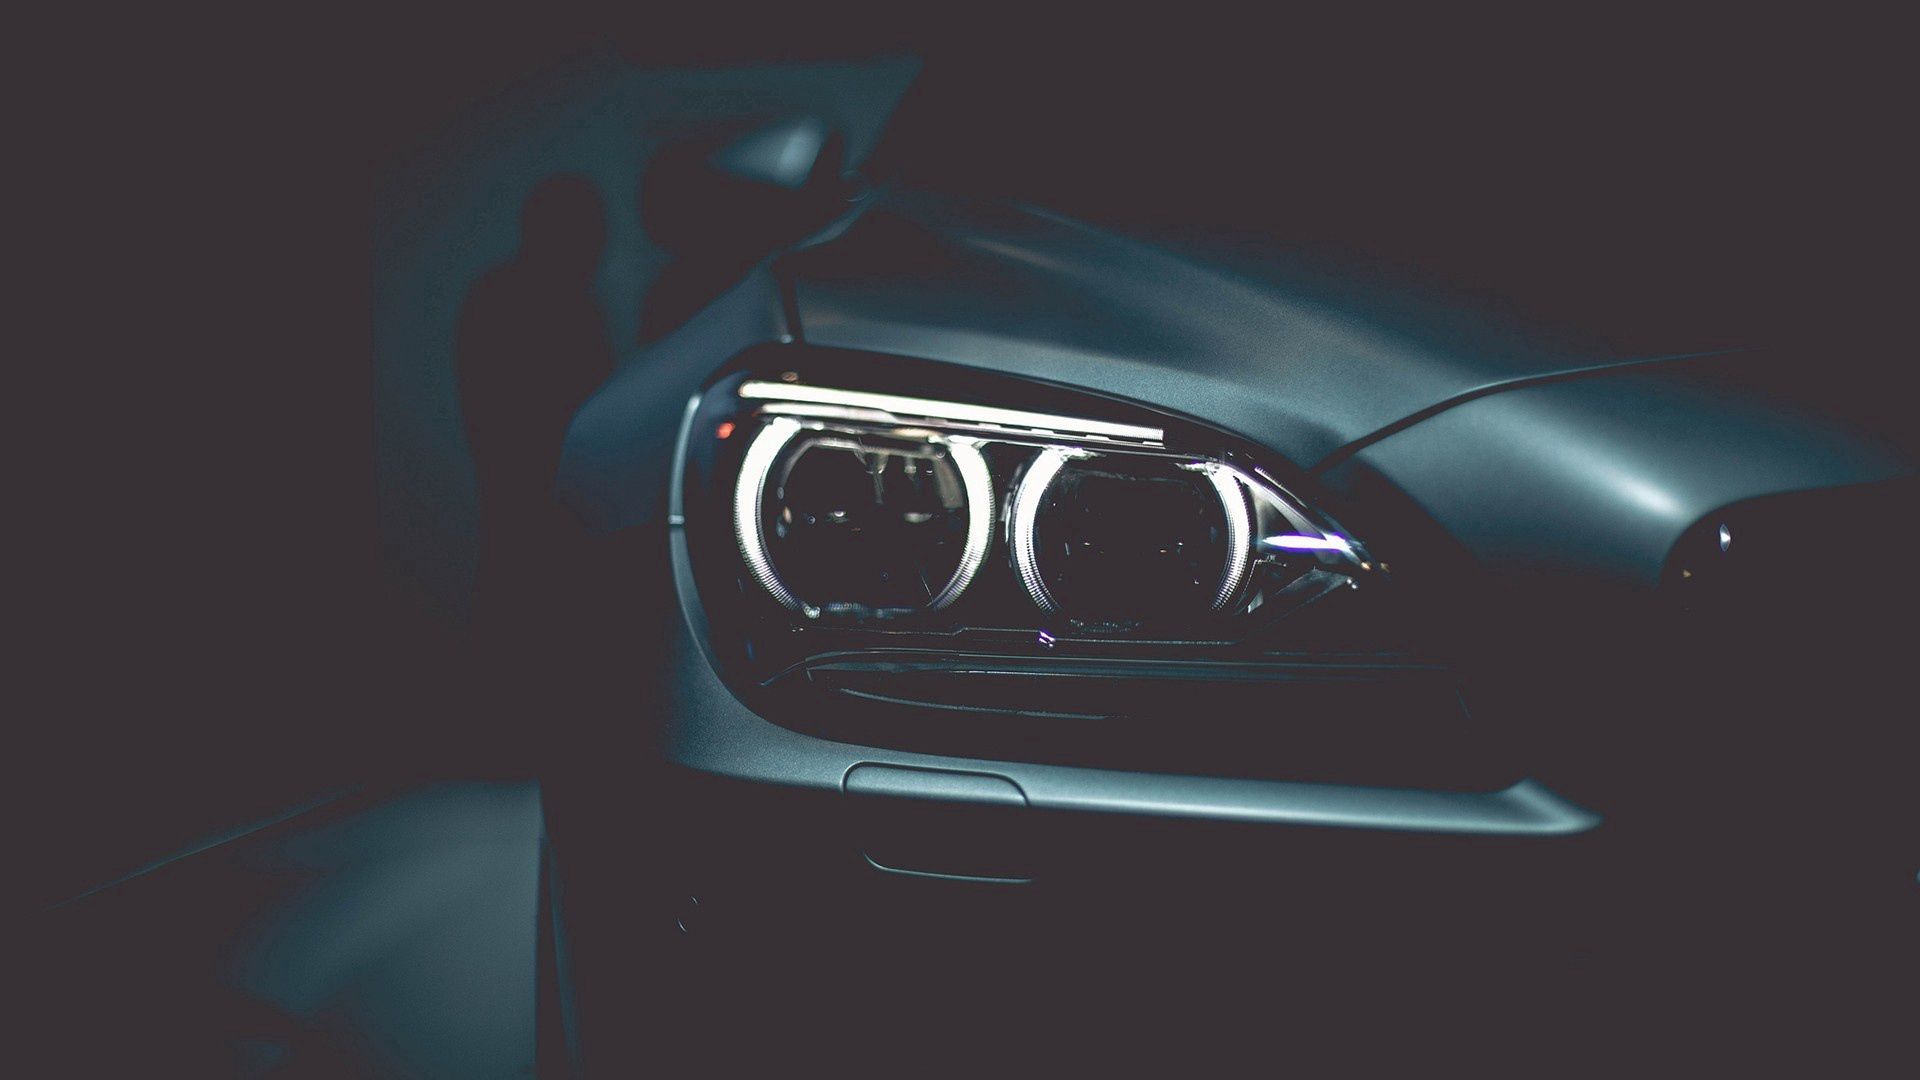 lights, cars, style, black New Lock Screen Backgrounds